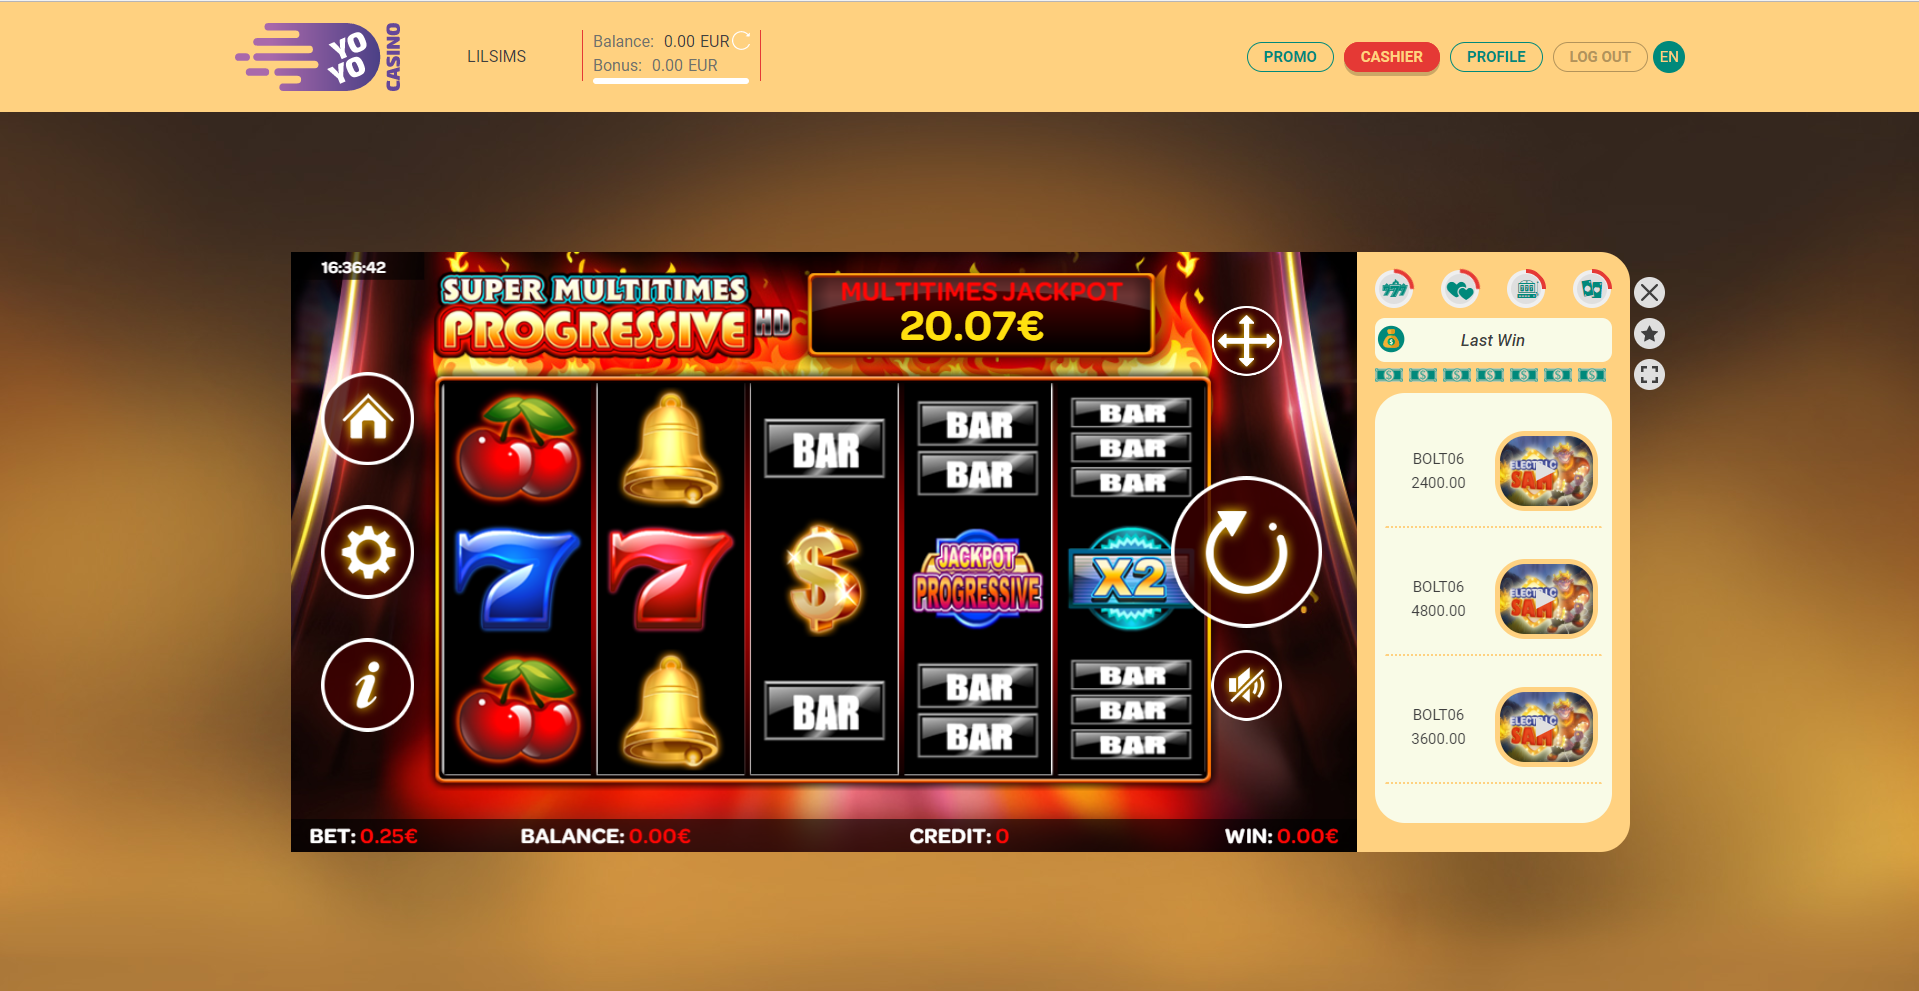 Play Roulette For Fun Online